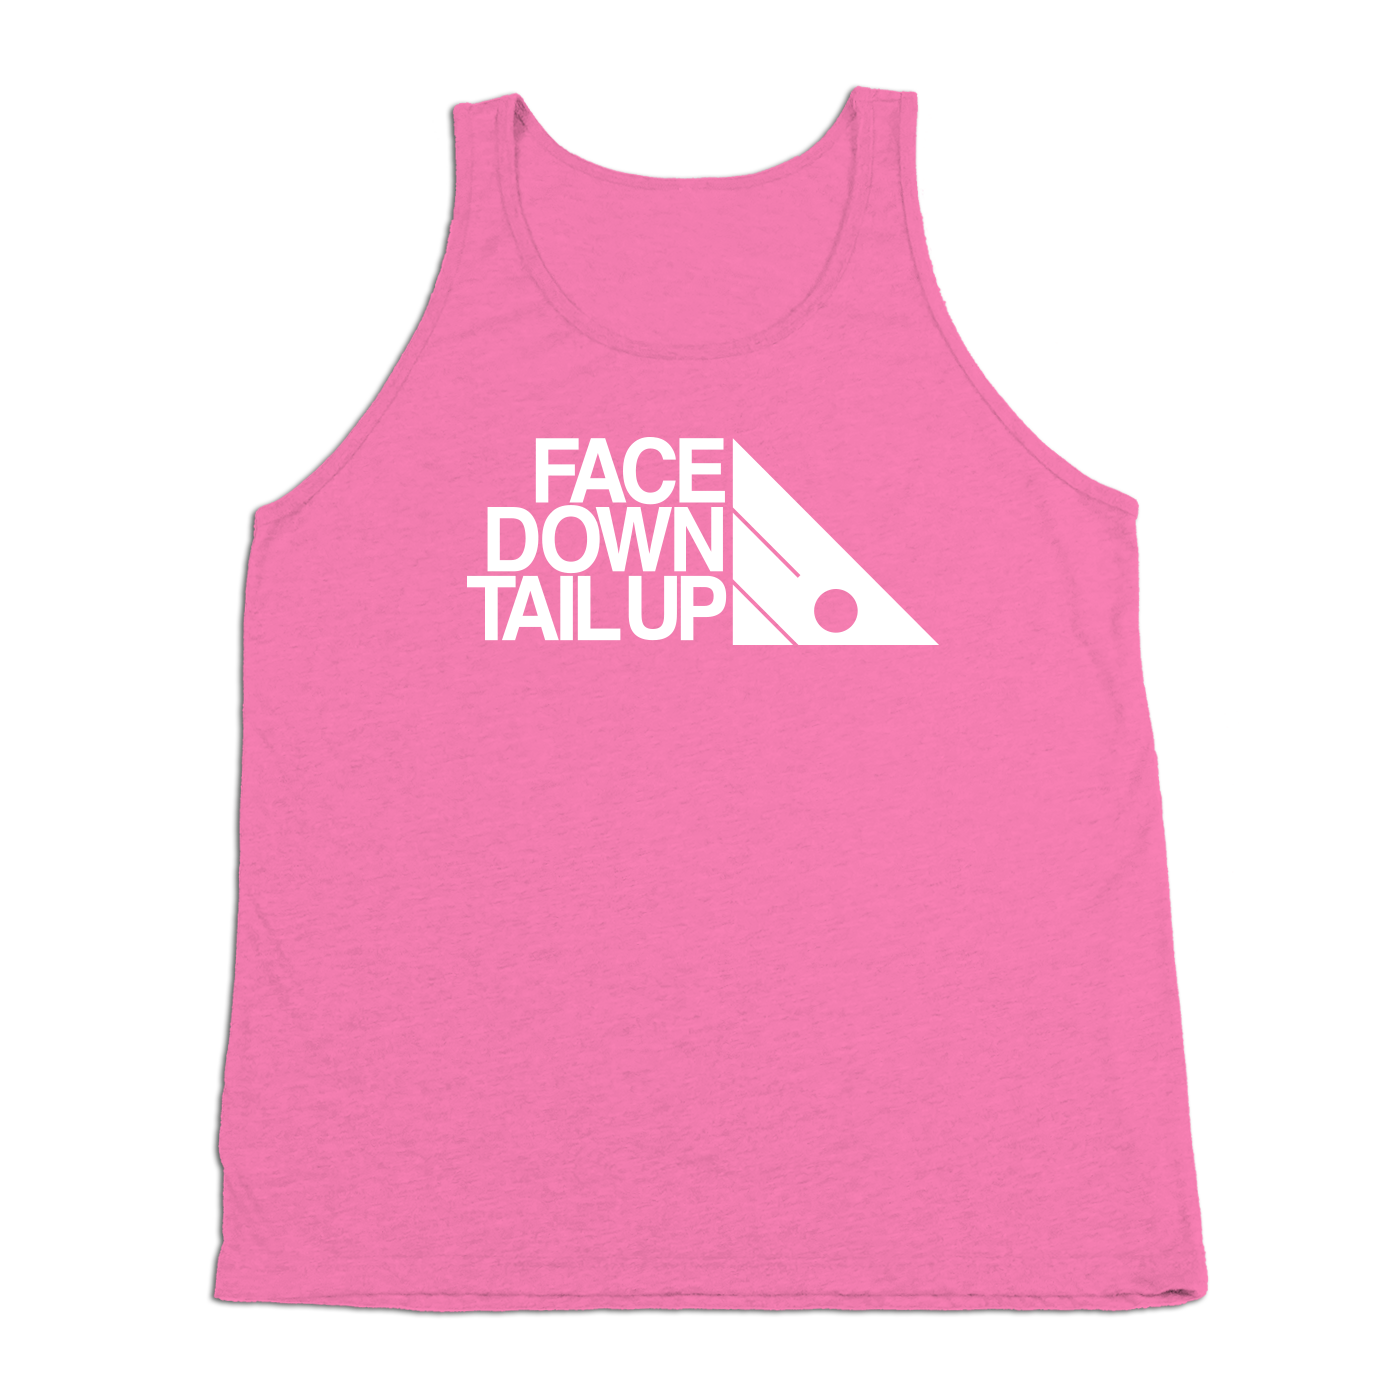 #FACEDOWNTAILUP TriBlend Tank Top - Hat Mount for GoPro